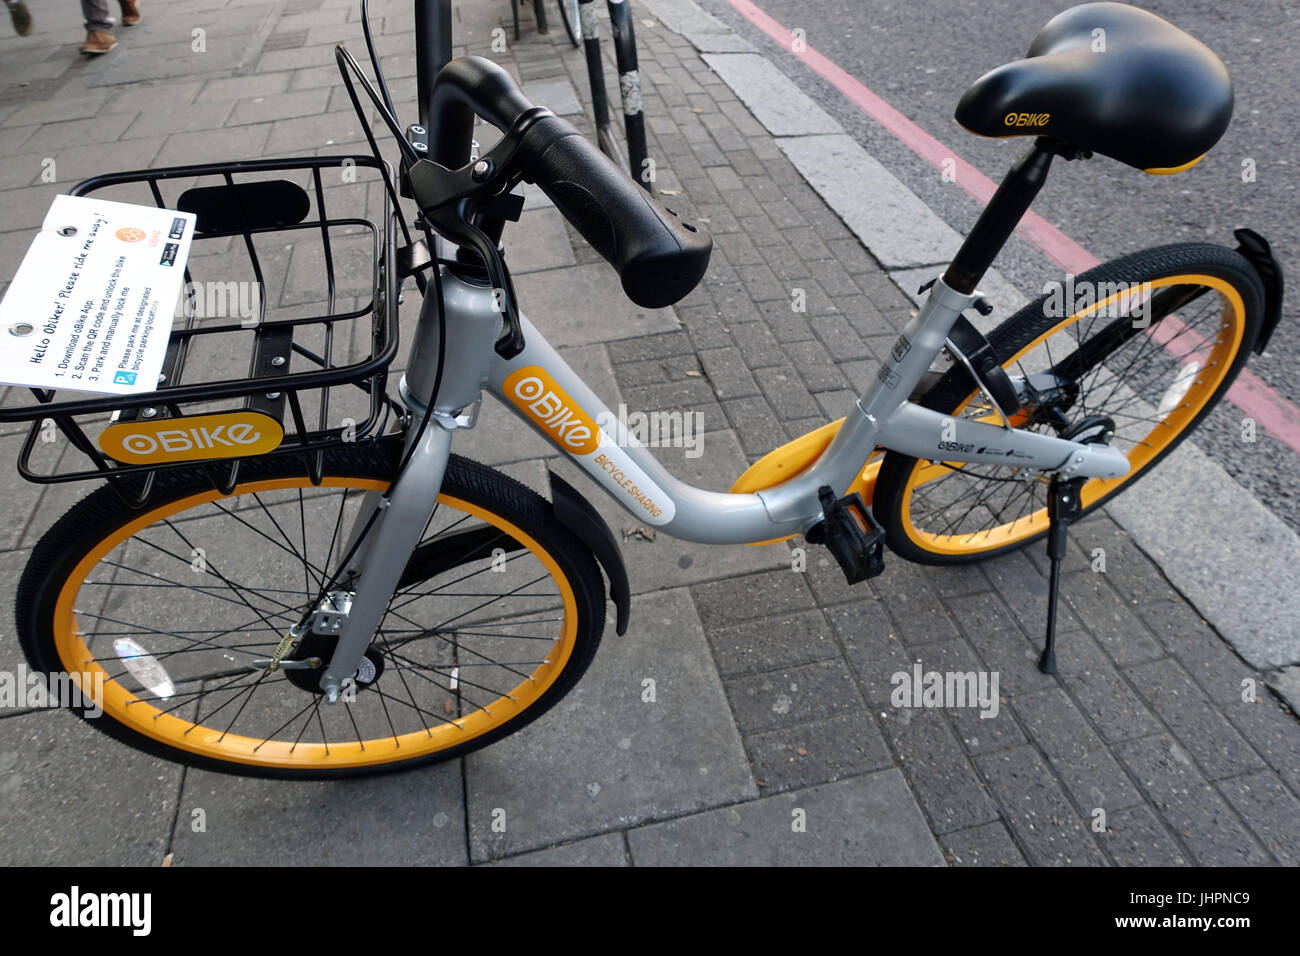 Bicycle Sharing Scheme High Resolution Stock Photography and Images - Alamy